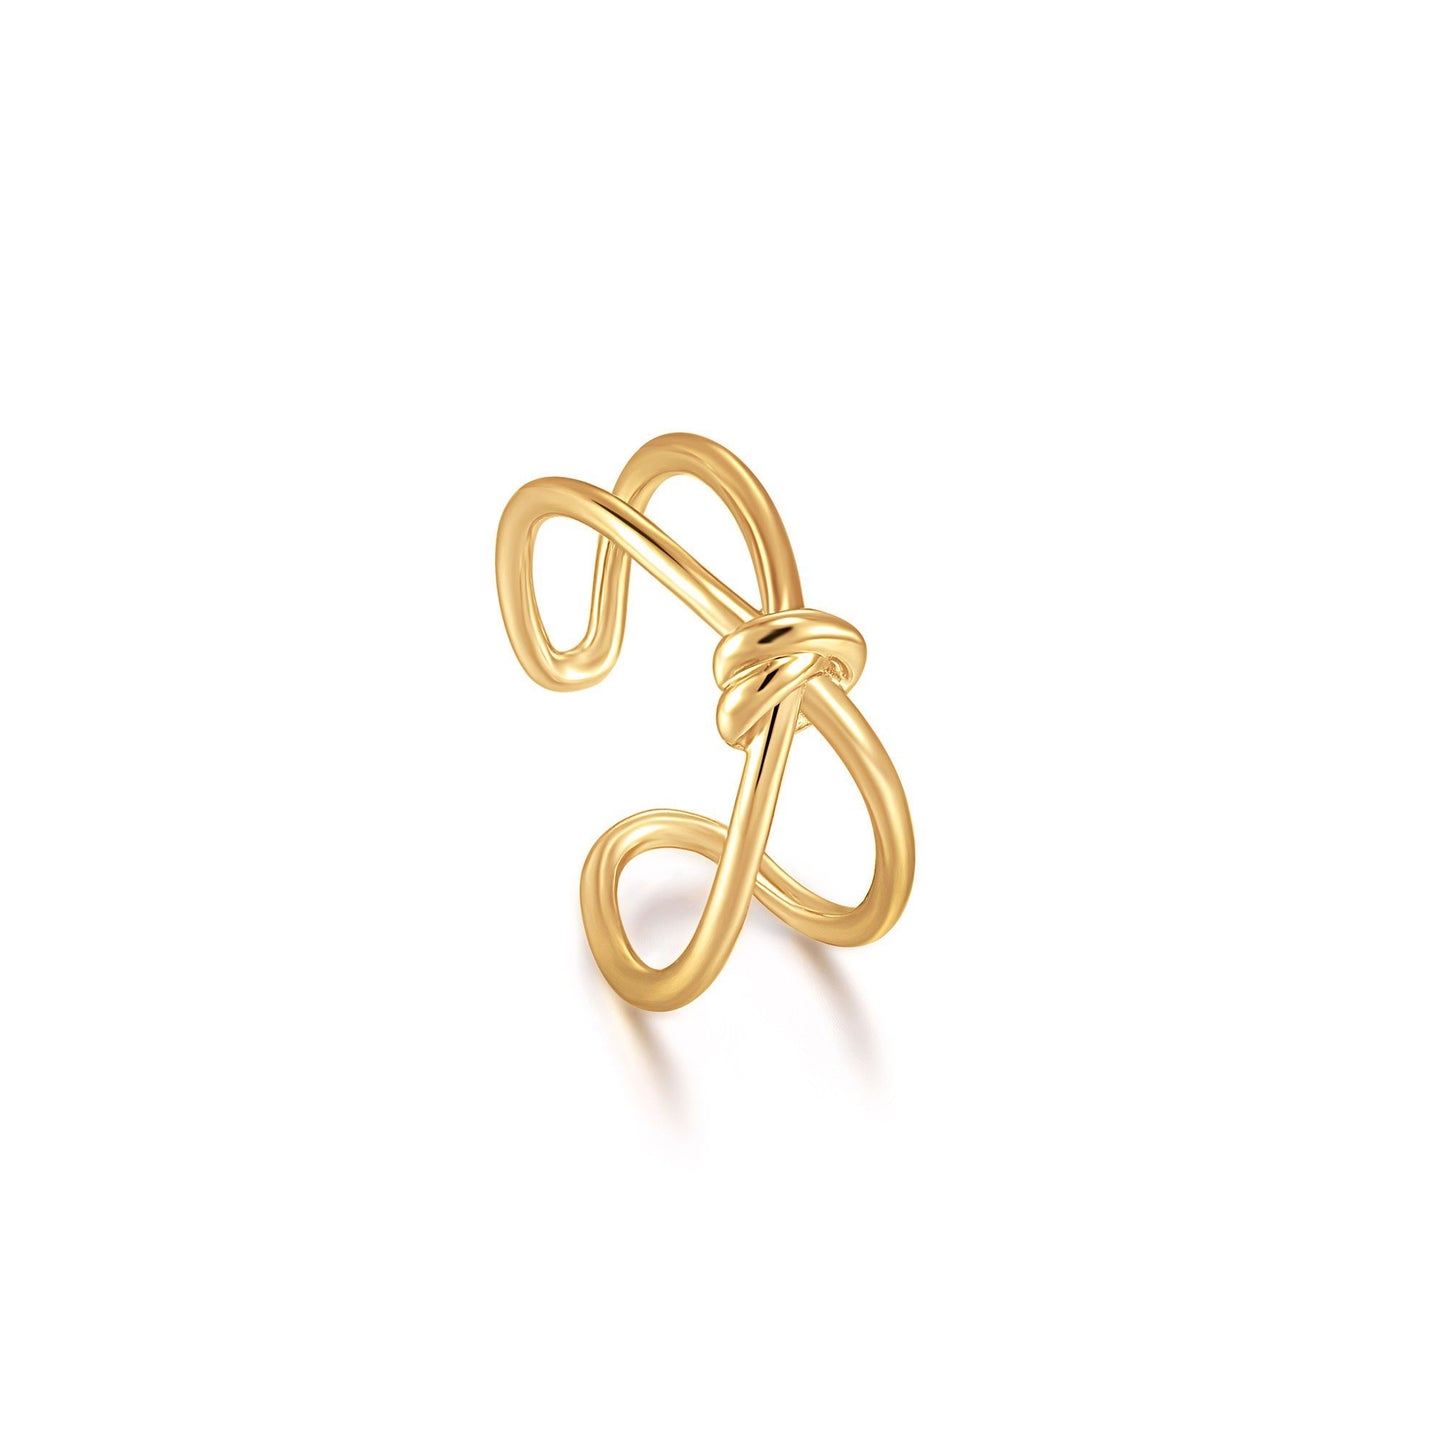 ANIA HAIE ANIA HAIE - Gold Knot Double Band Adjustable Ring available at The Good Life Boutique